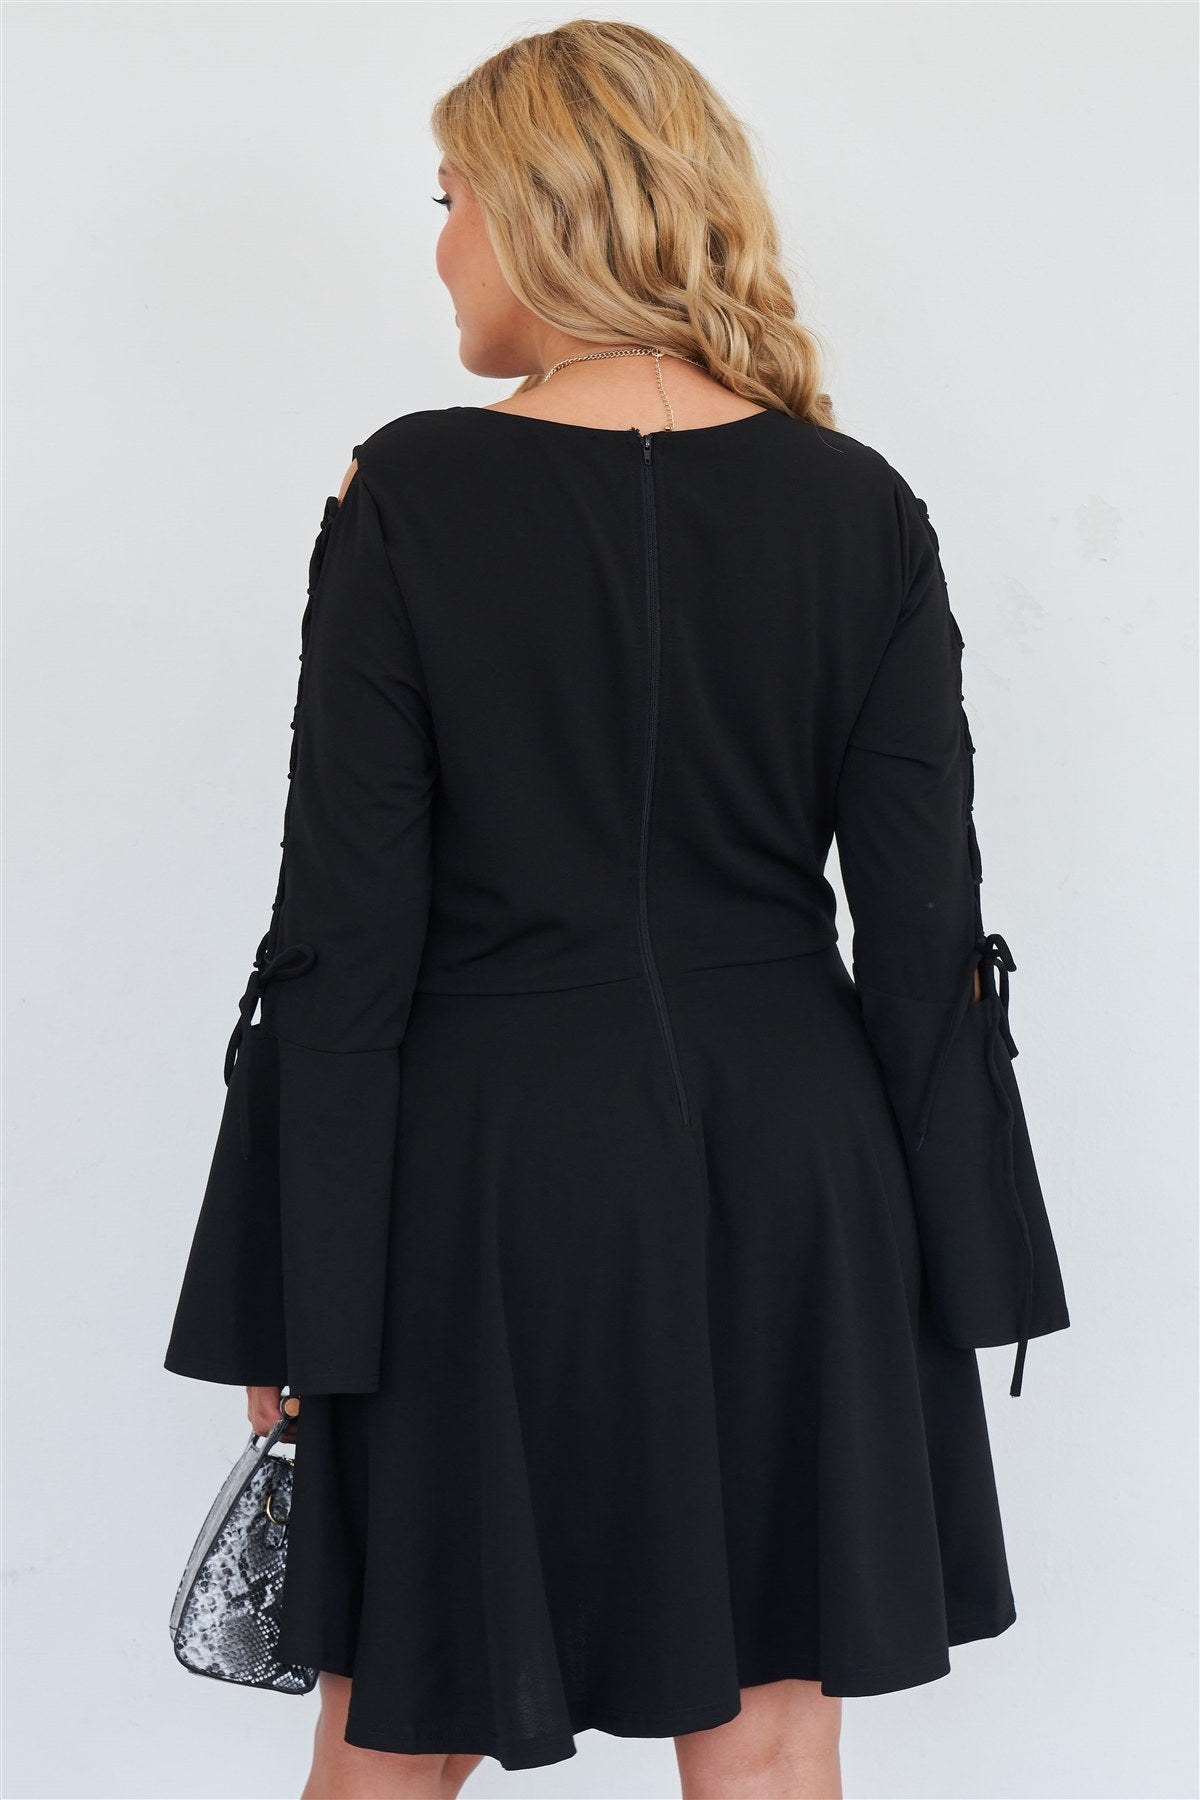 Plus Size Black Lace Up Detail Bell Sleeve Dress